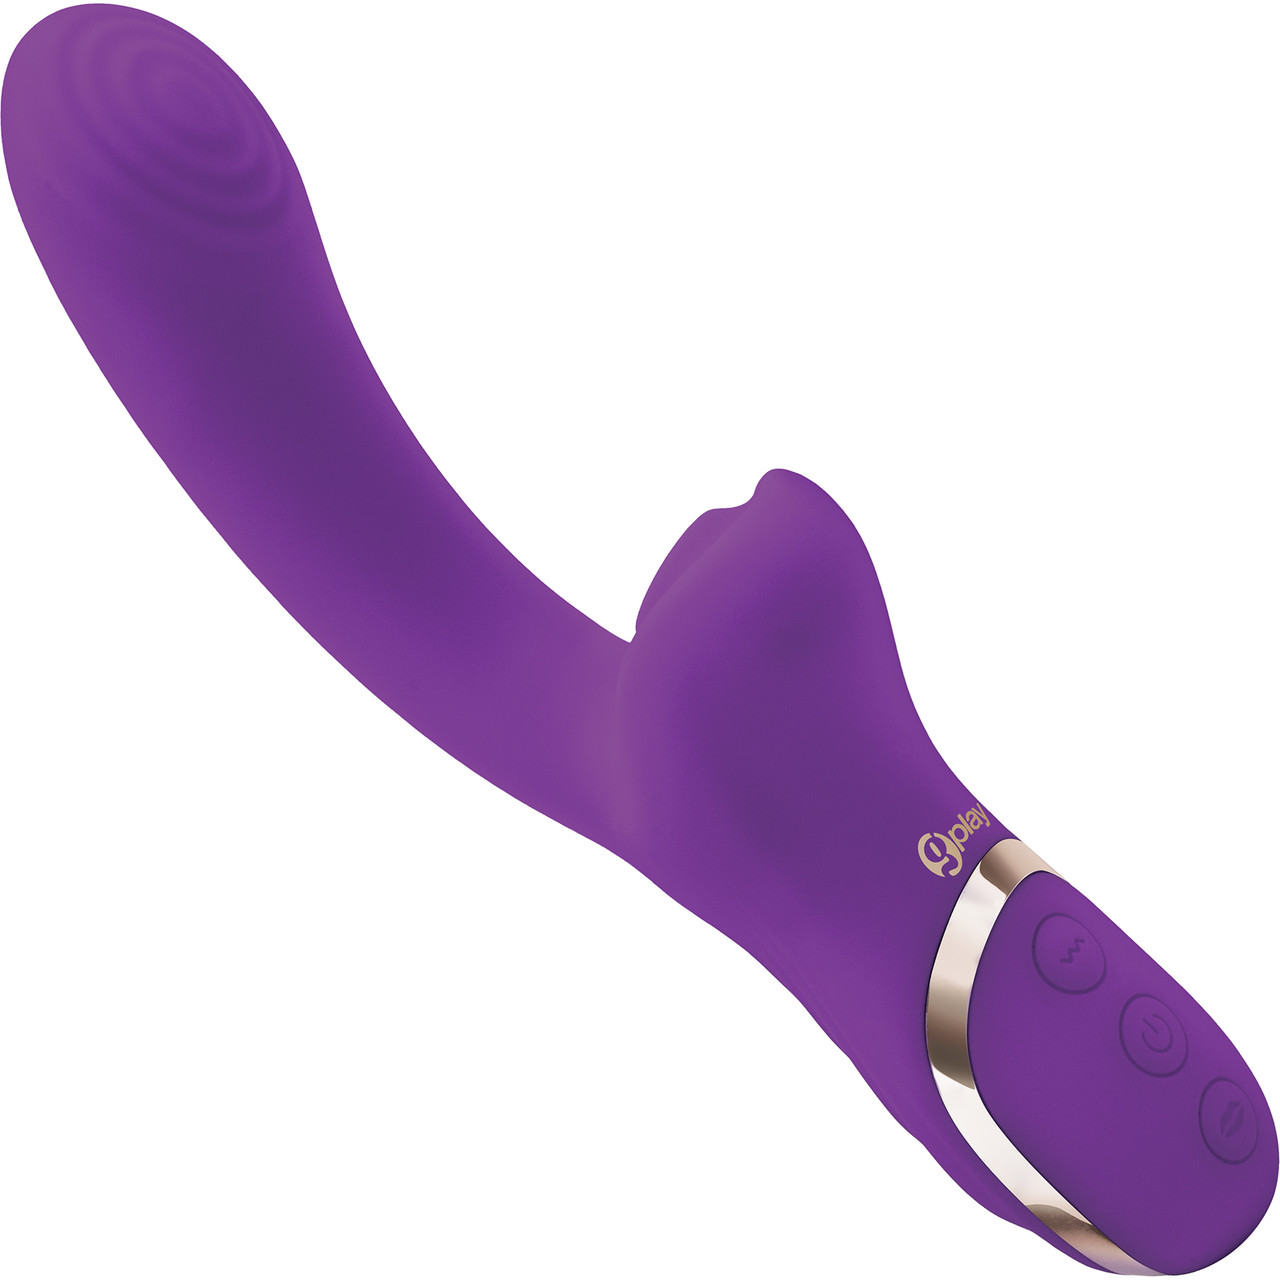 dave ryman recommends How To Squirt With A Vibrator